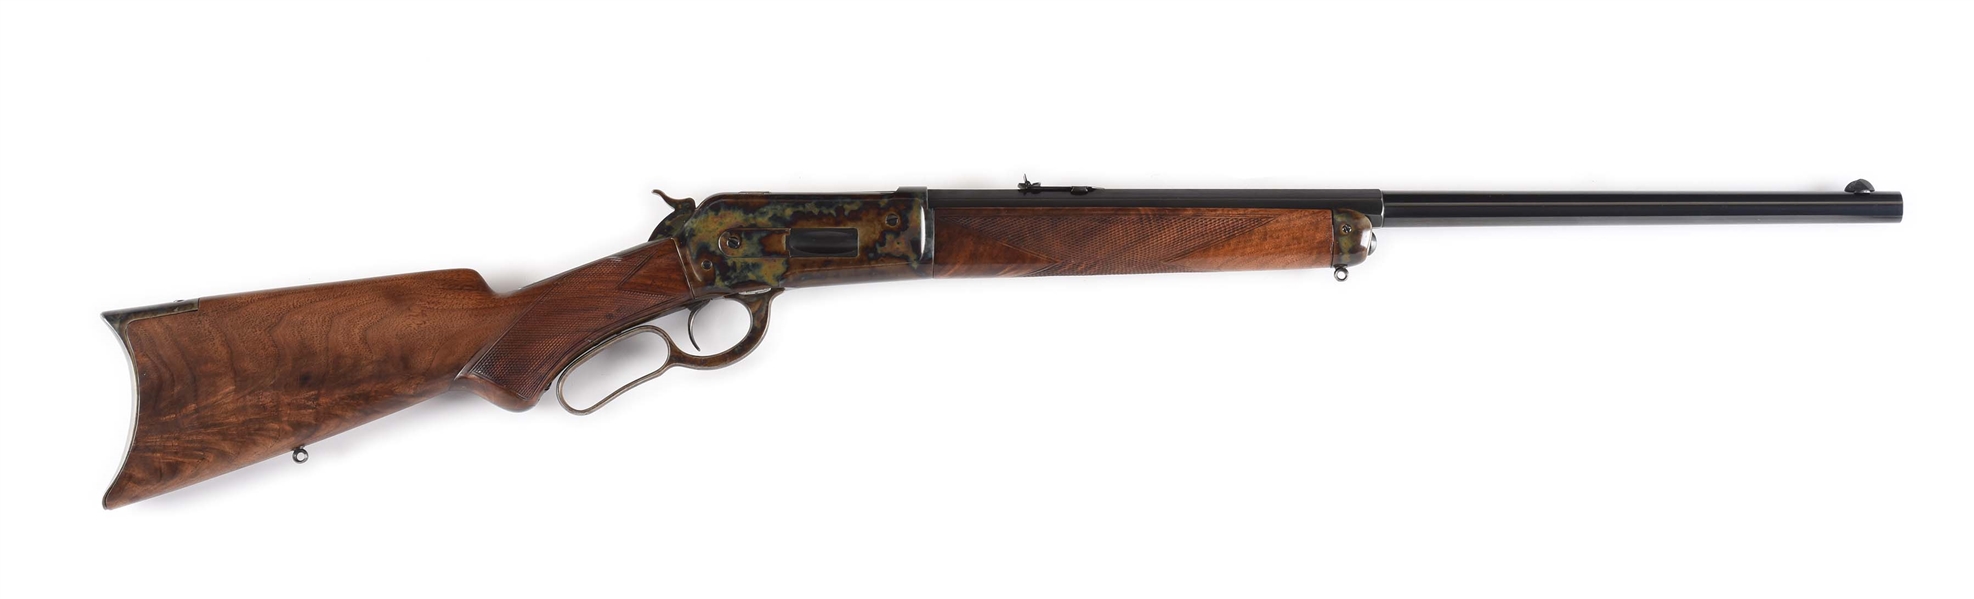 (A) CUSTOM DELUXE WINCHESTER MODEL 1886 "BIG 50" LEVER ACTION RIFLE (1891).